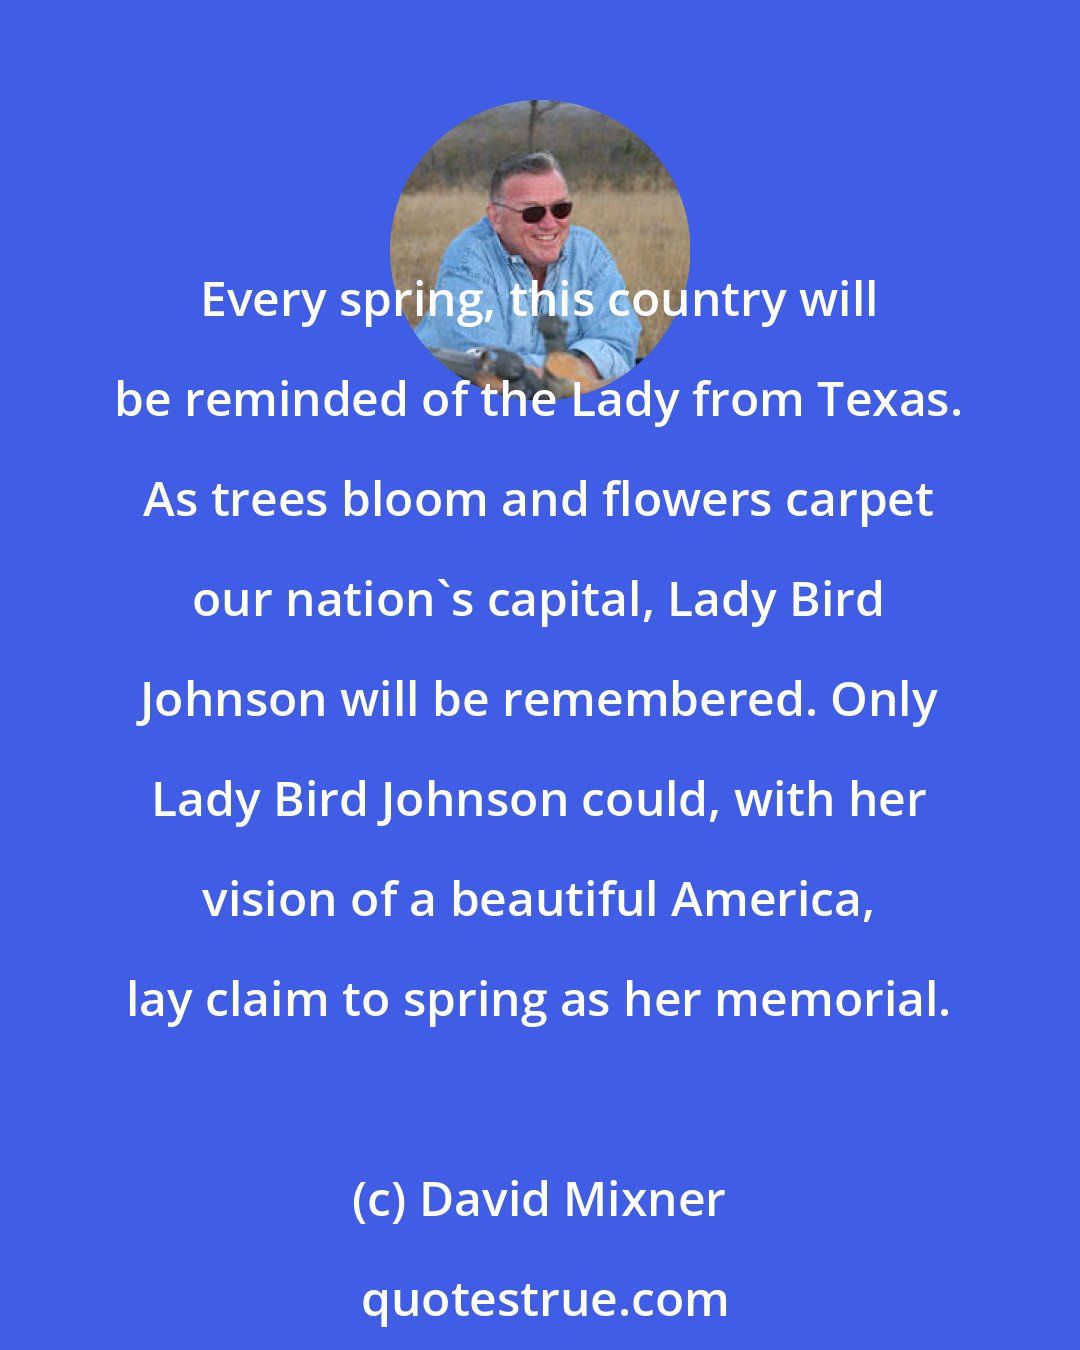 David Mixner: Every spring, this country will be reminded of the Lady from Texas. As trees bloom and flowers carpet our nation's capital, Lady Bird Johnson will be remembered. Only Lady Bird Johnson could, with her vision of a beautiful America, lay claim to spring as her memorial.